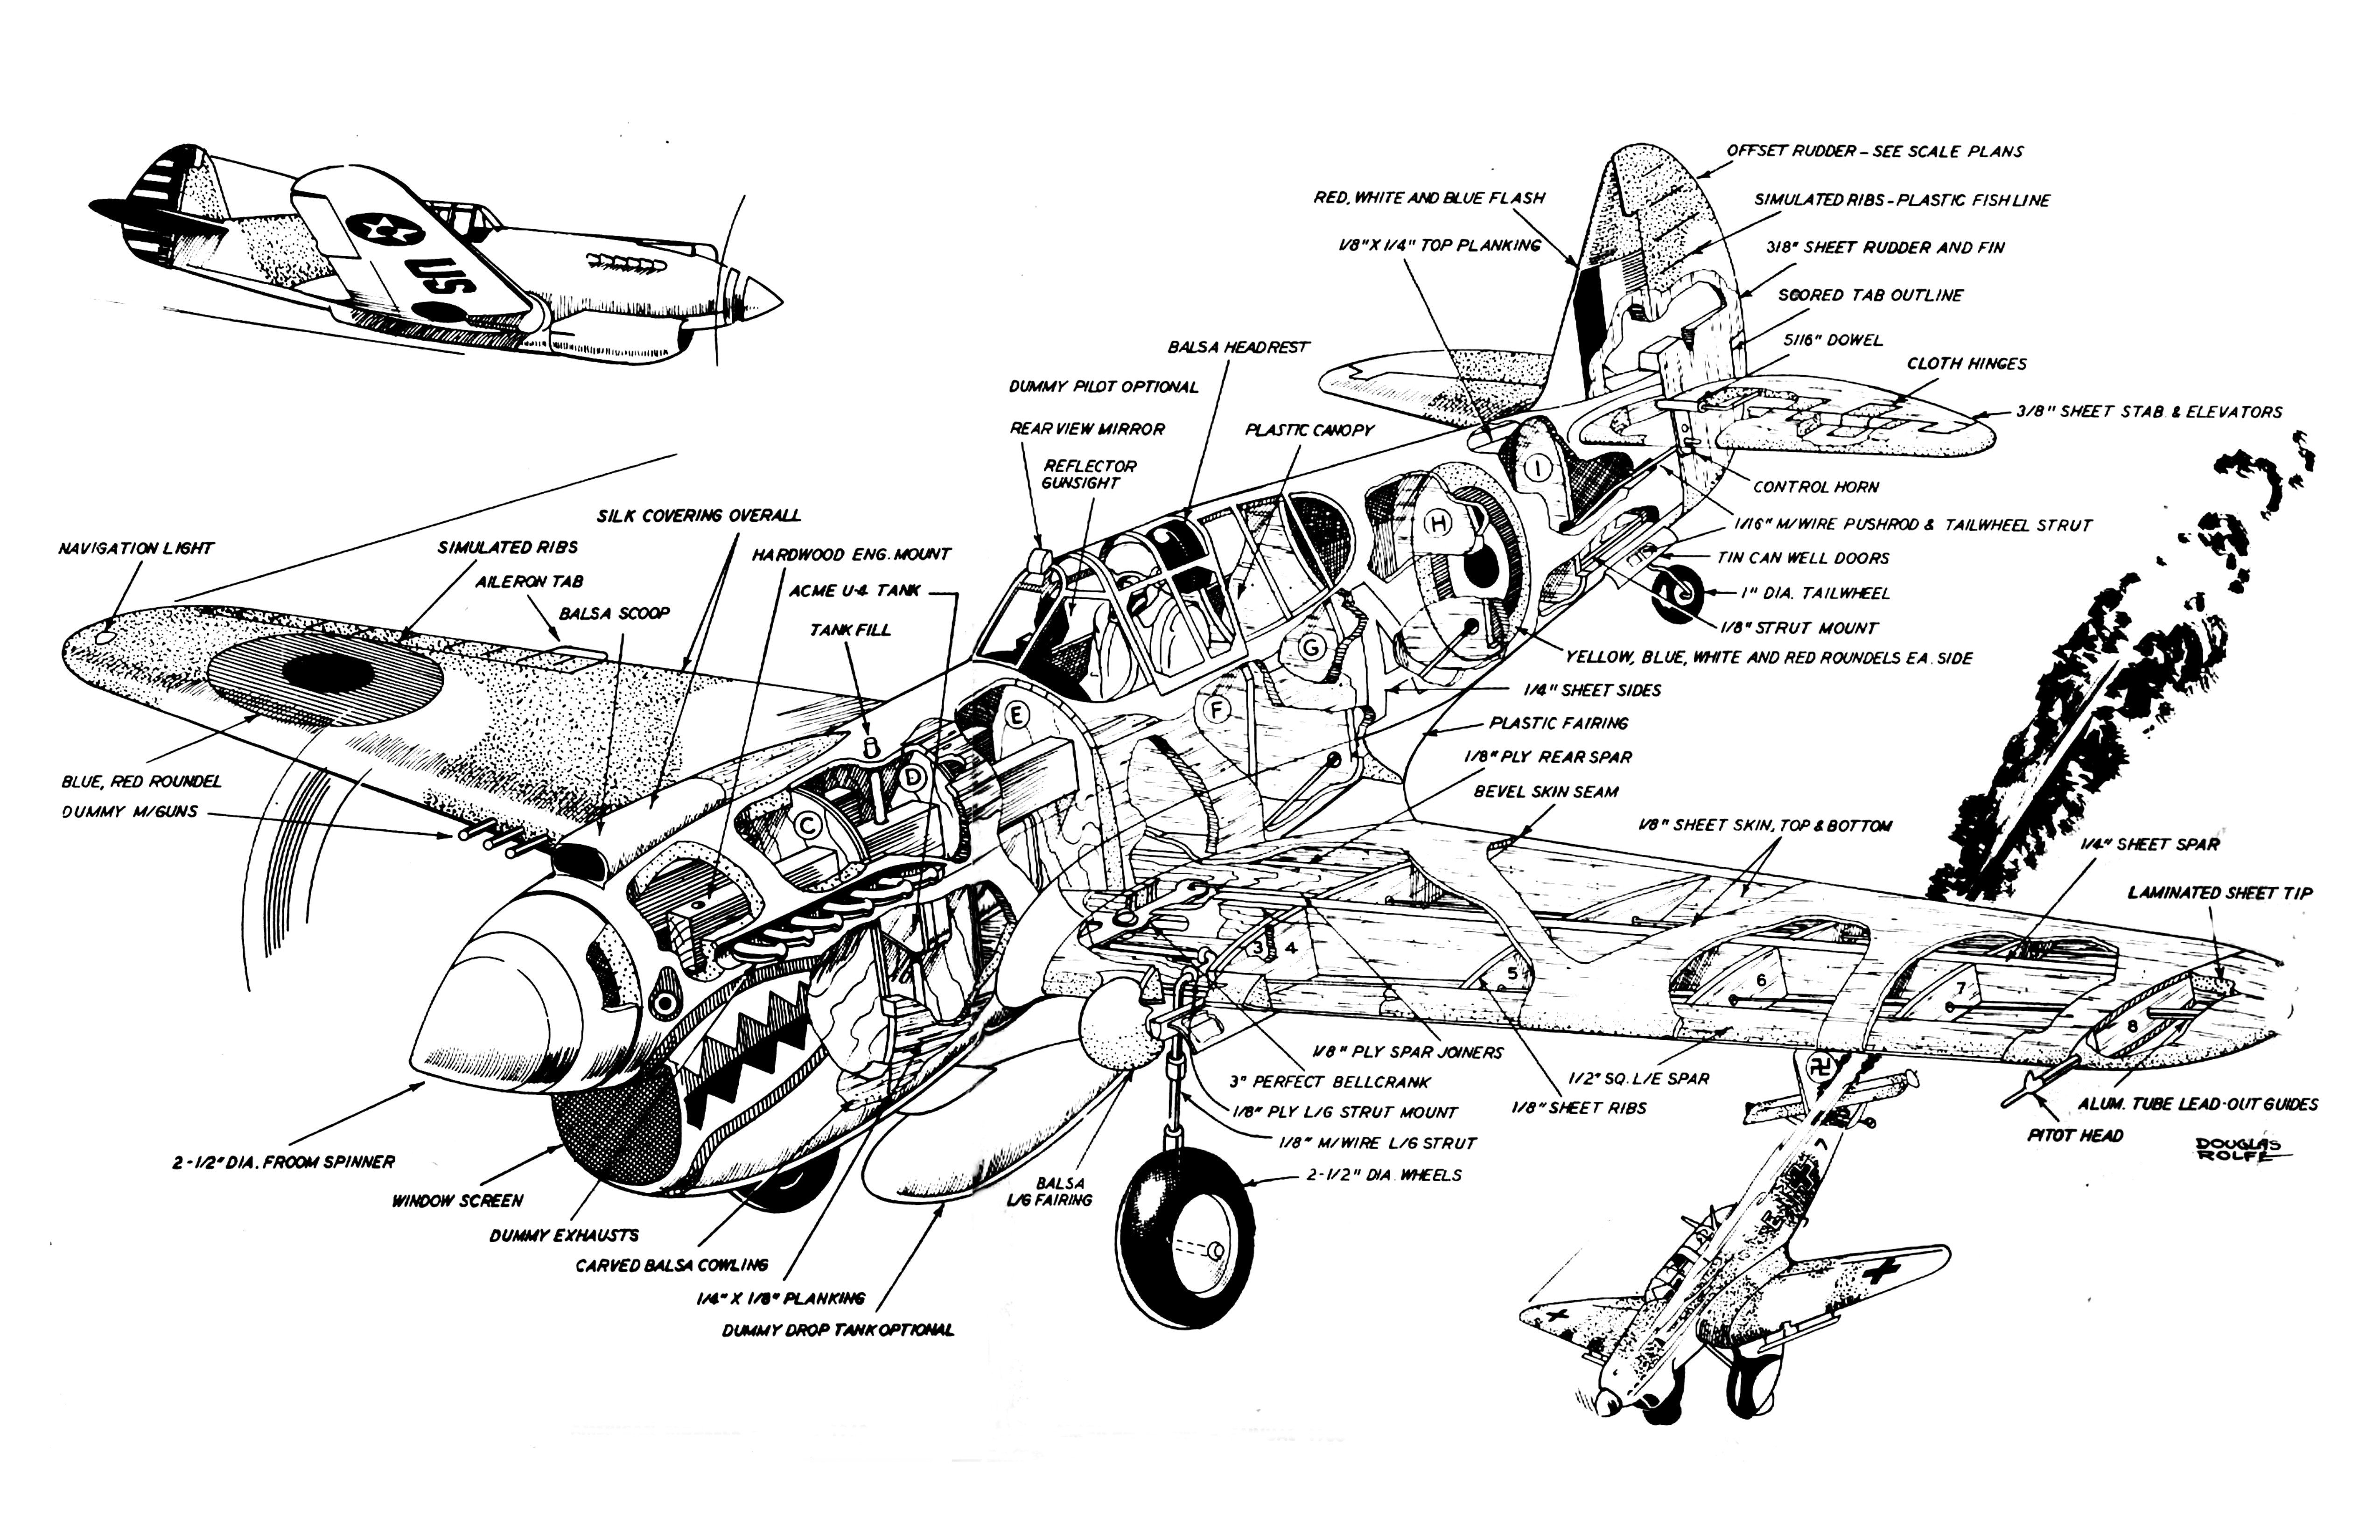 full size  plans control line  scale 1"=1' curtiss p40e kittyhawk  wingspan 37”  engine .29 to .60